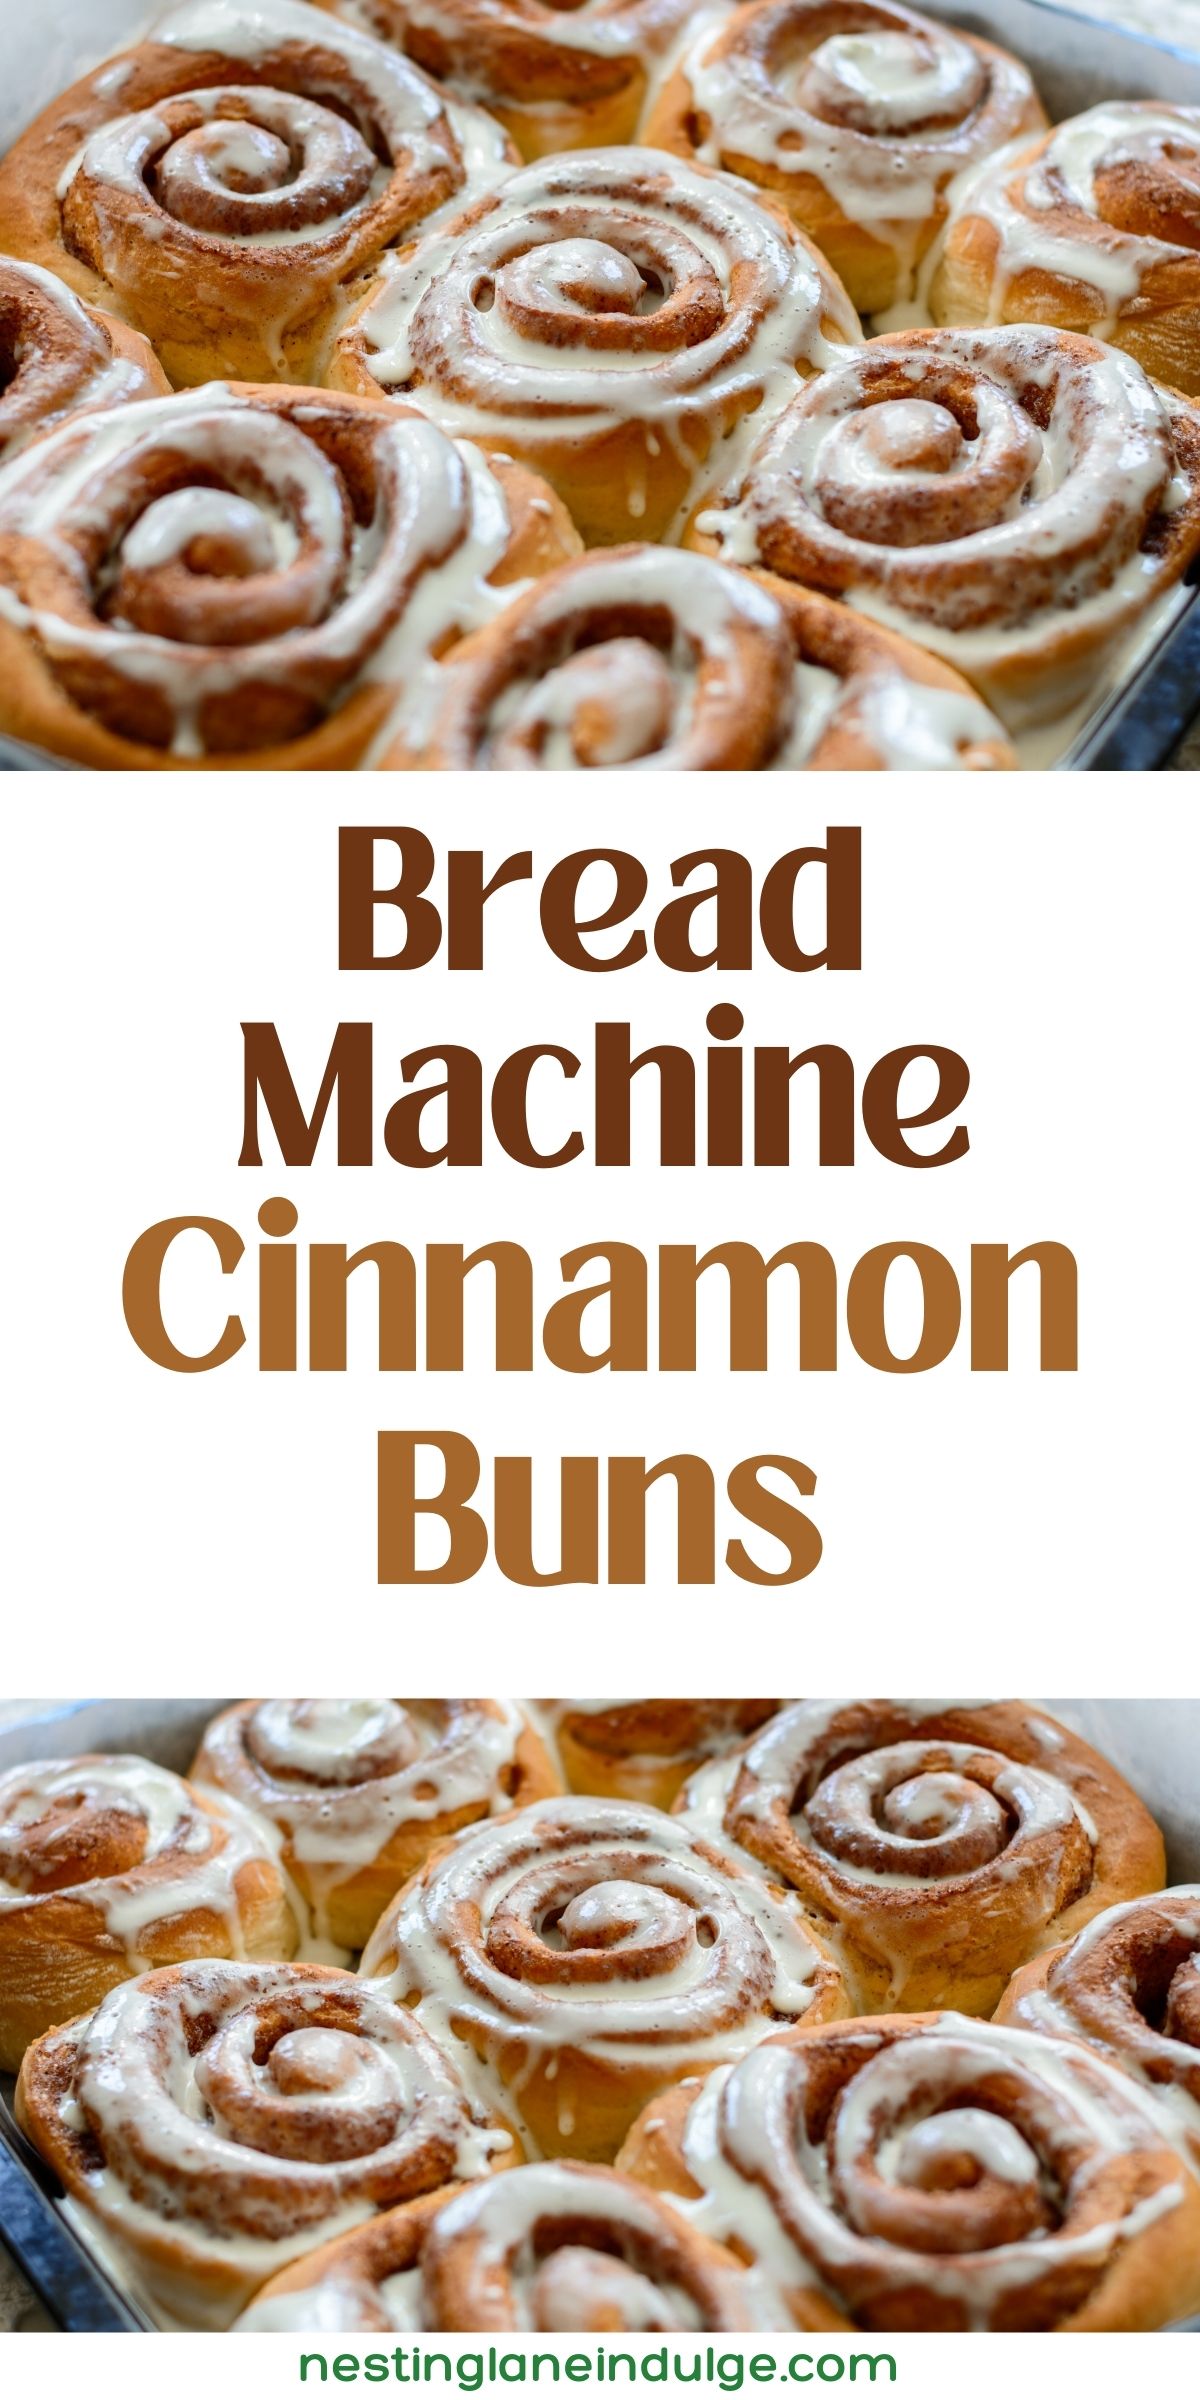 The image features a two-part visual: the top half shows freshly baked cinnamon buns with white glaze in a baking dish, while the bottom half has bold text that reads 'Bread Machine Cinnamon Buns' above the website name 'nestinglaneindulge.com'.